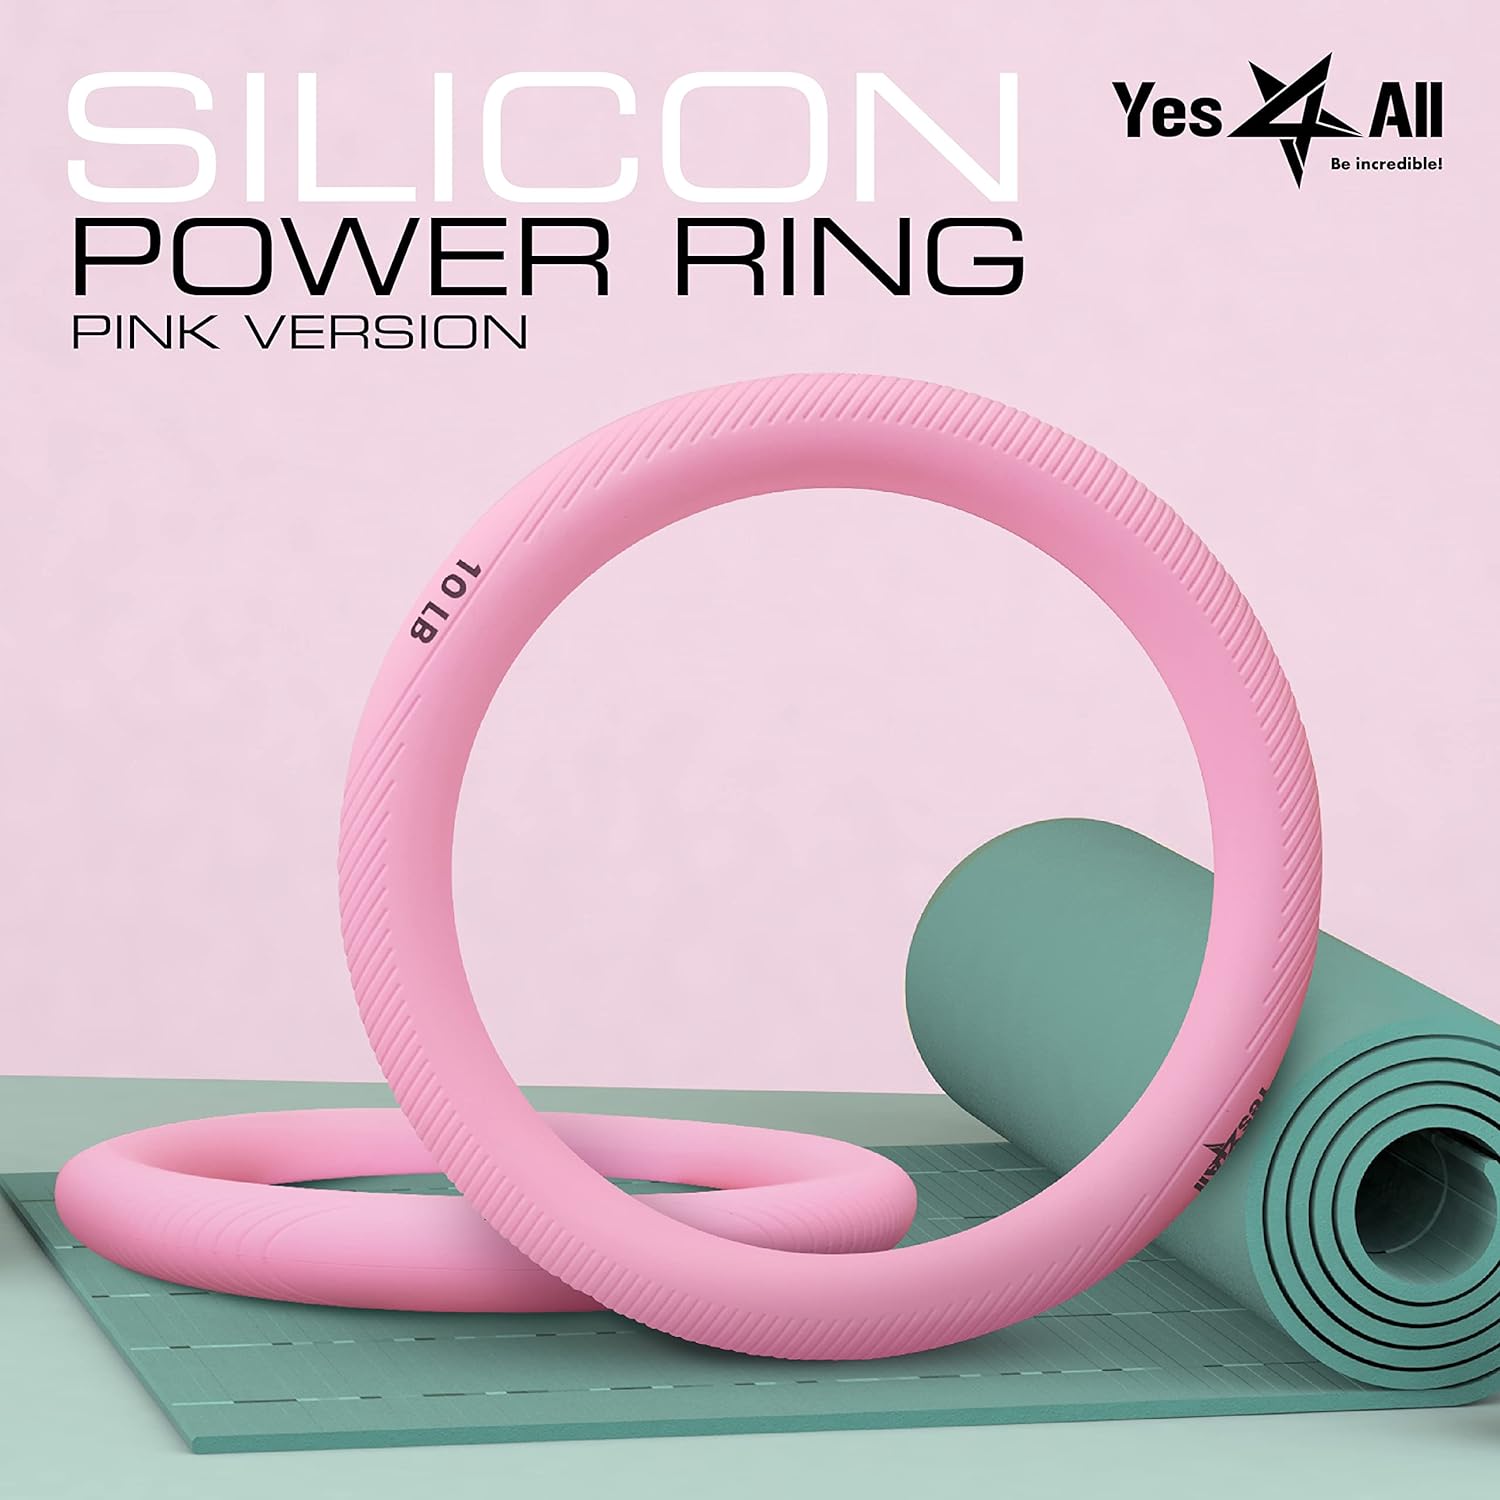 Yes4All Power Ring 10lbs, Weight Ring, Weighted Circle, Kettlebell for Yoga Exercise, Aerobics, Home Fitness, Core Training